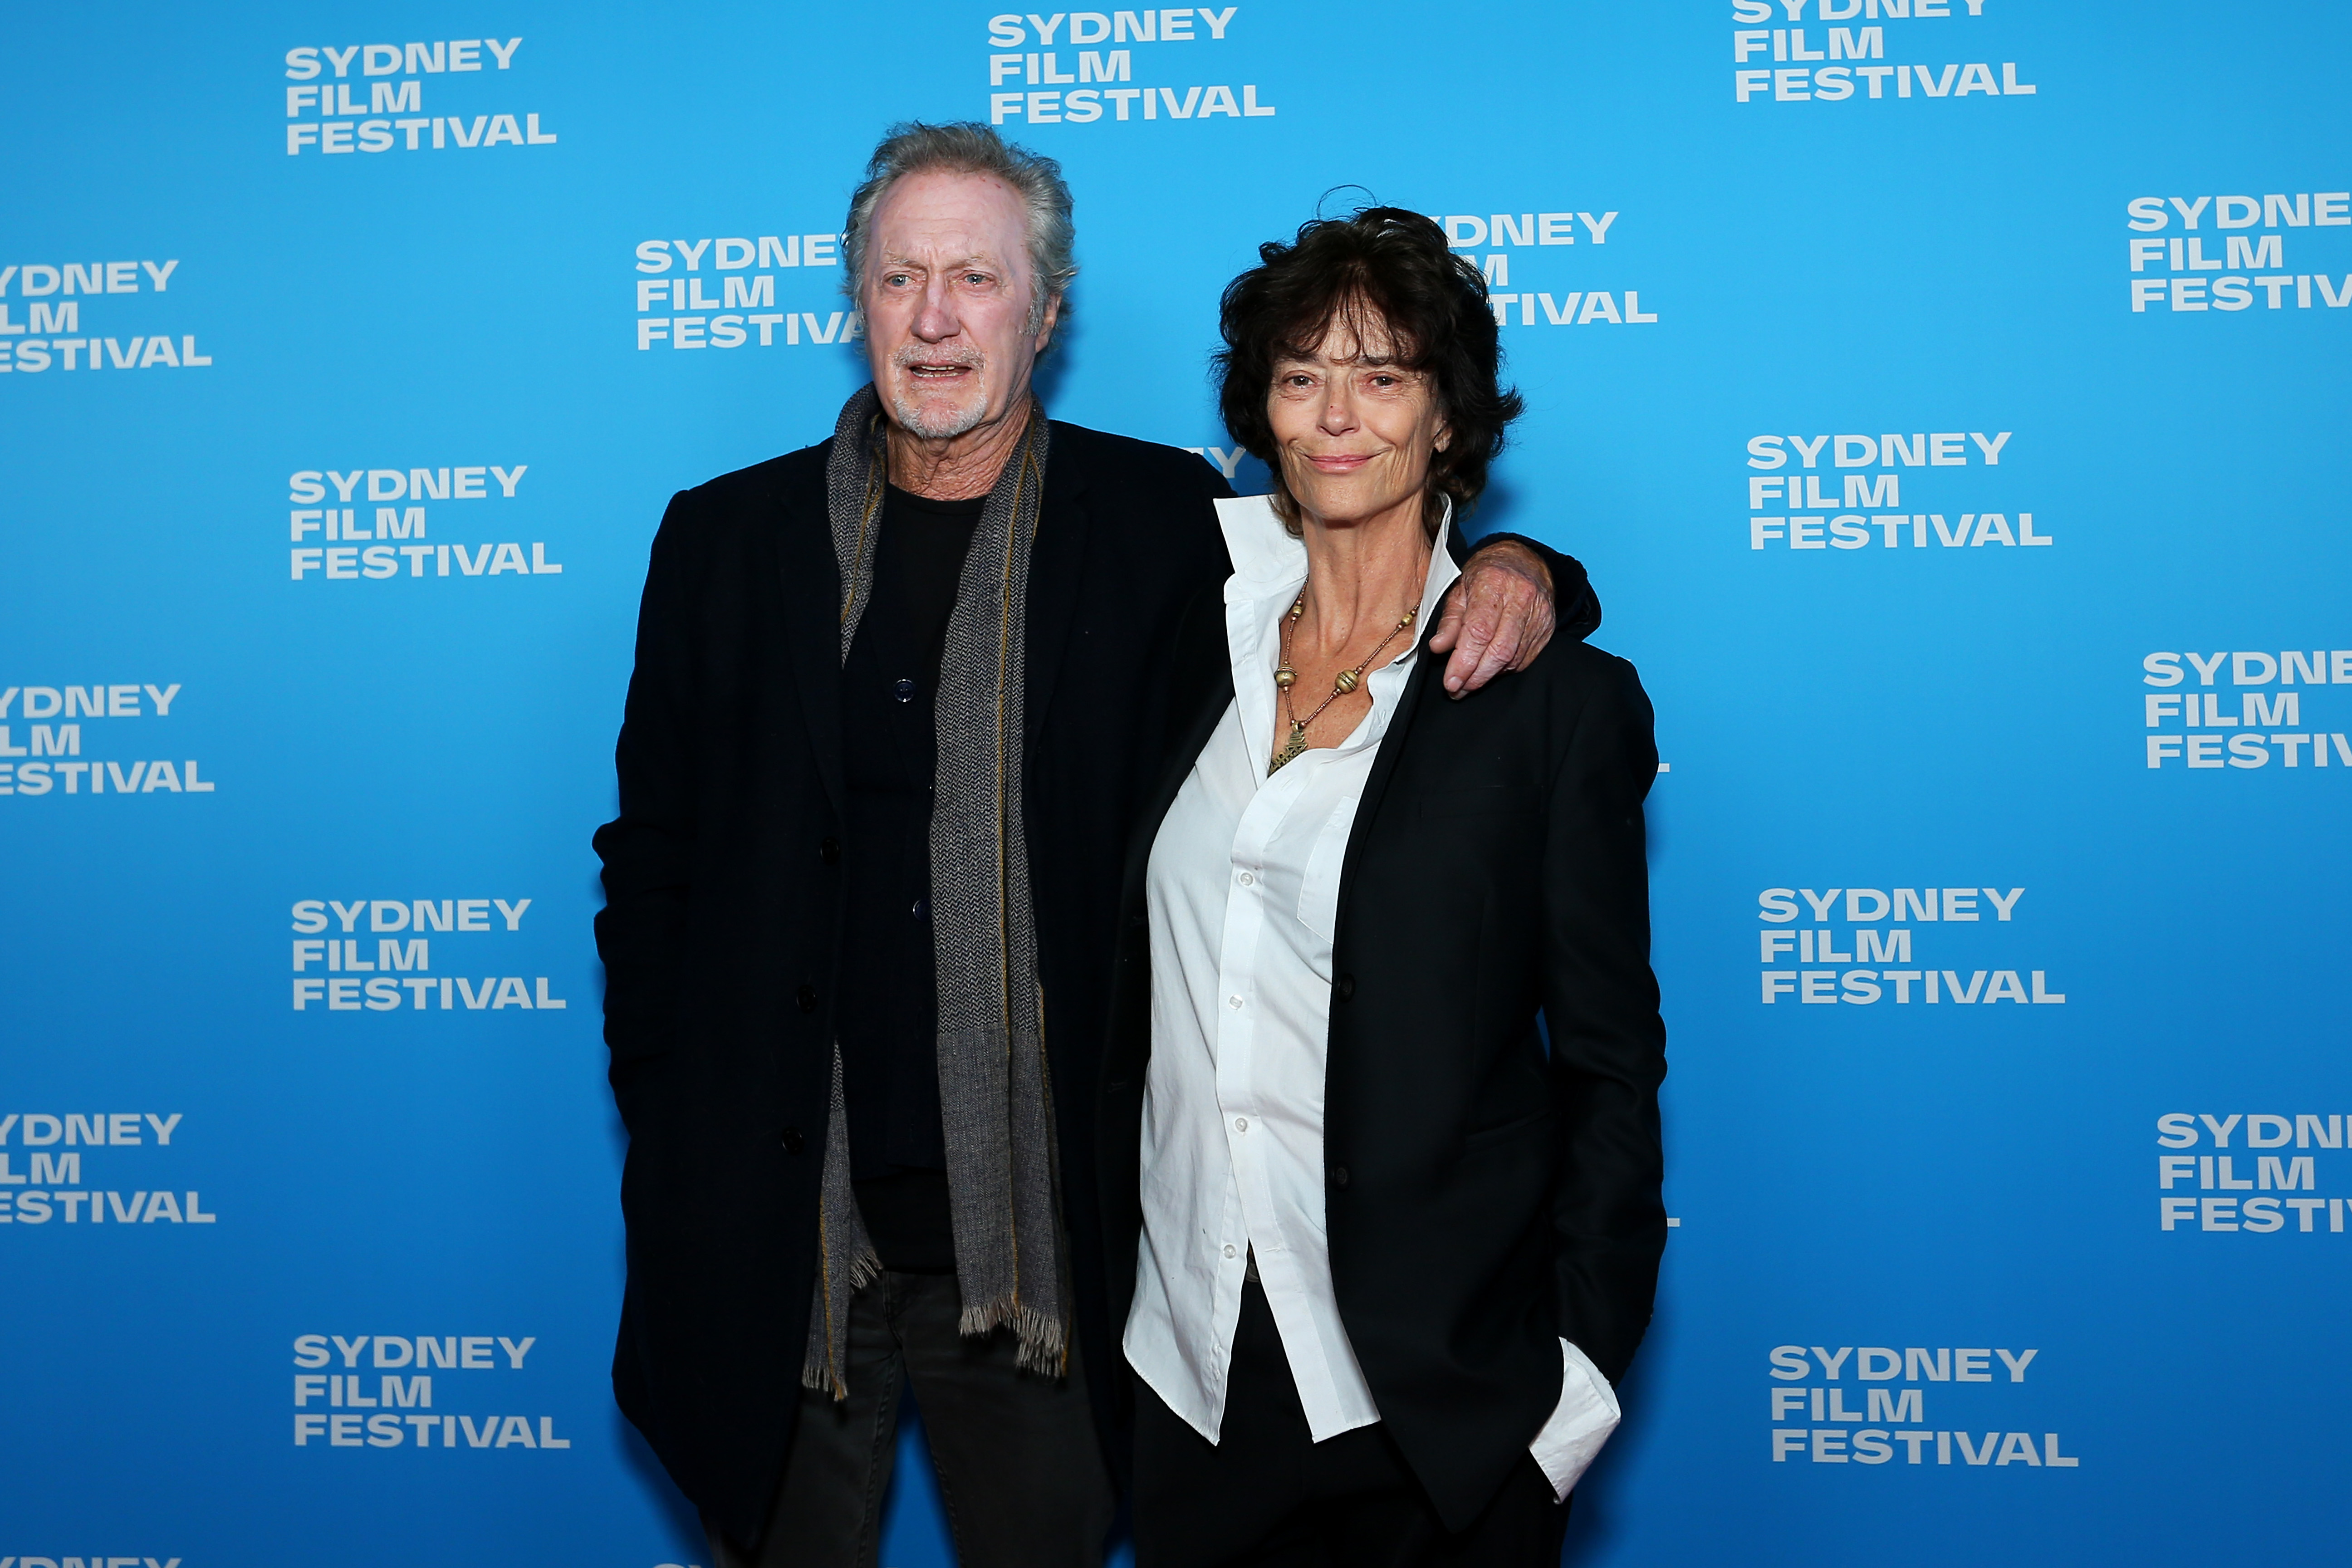 Bryan Brown and Rachel Ward at the Sydney Film Festival 2023 Opening Night for the premiere of "The New Boy" in June 2023 | Source: Getty Images